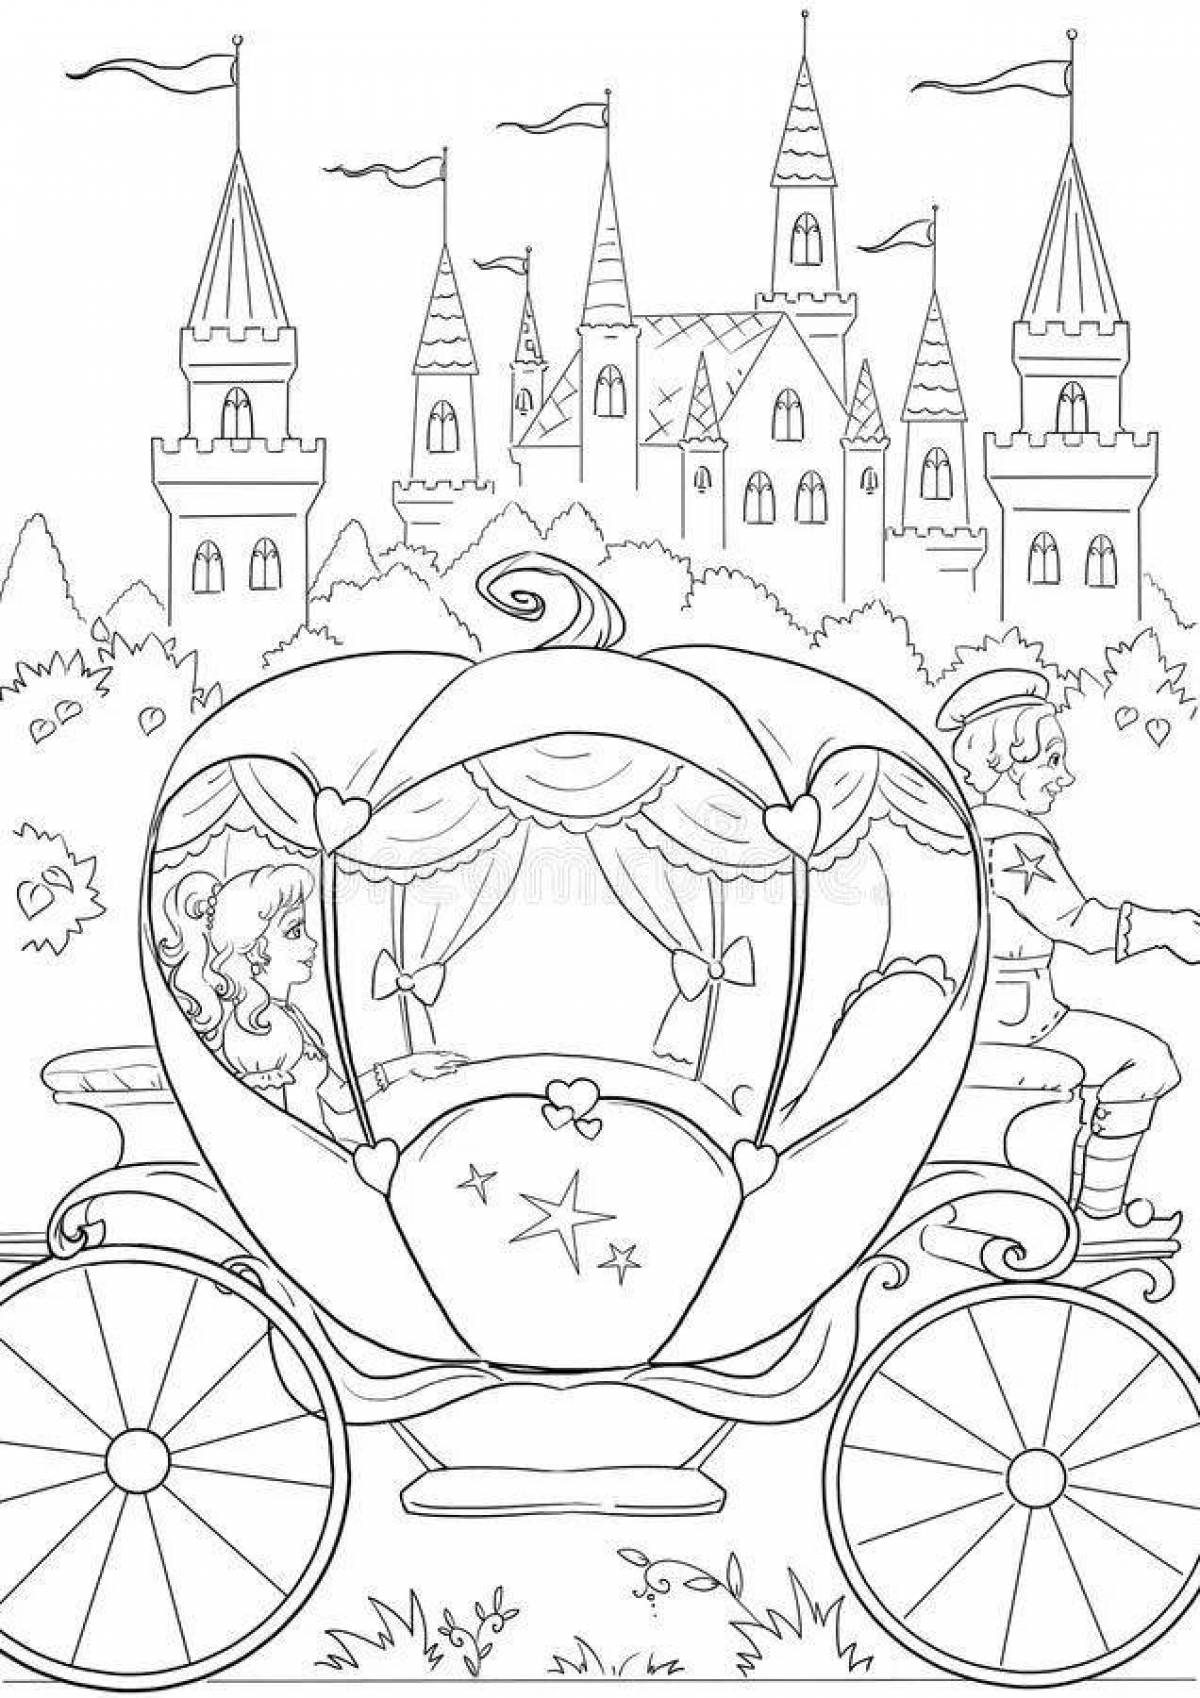 Cinderella's glamorous carriage coloring page